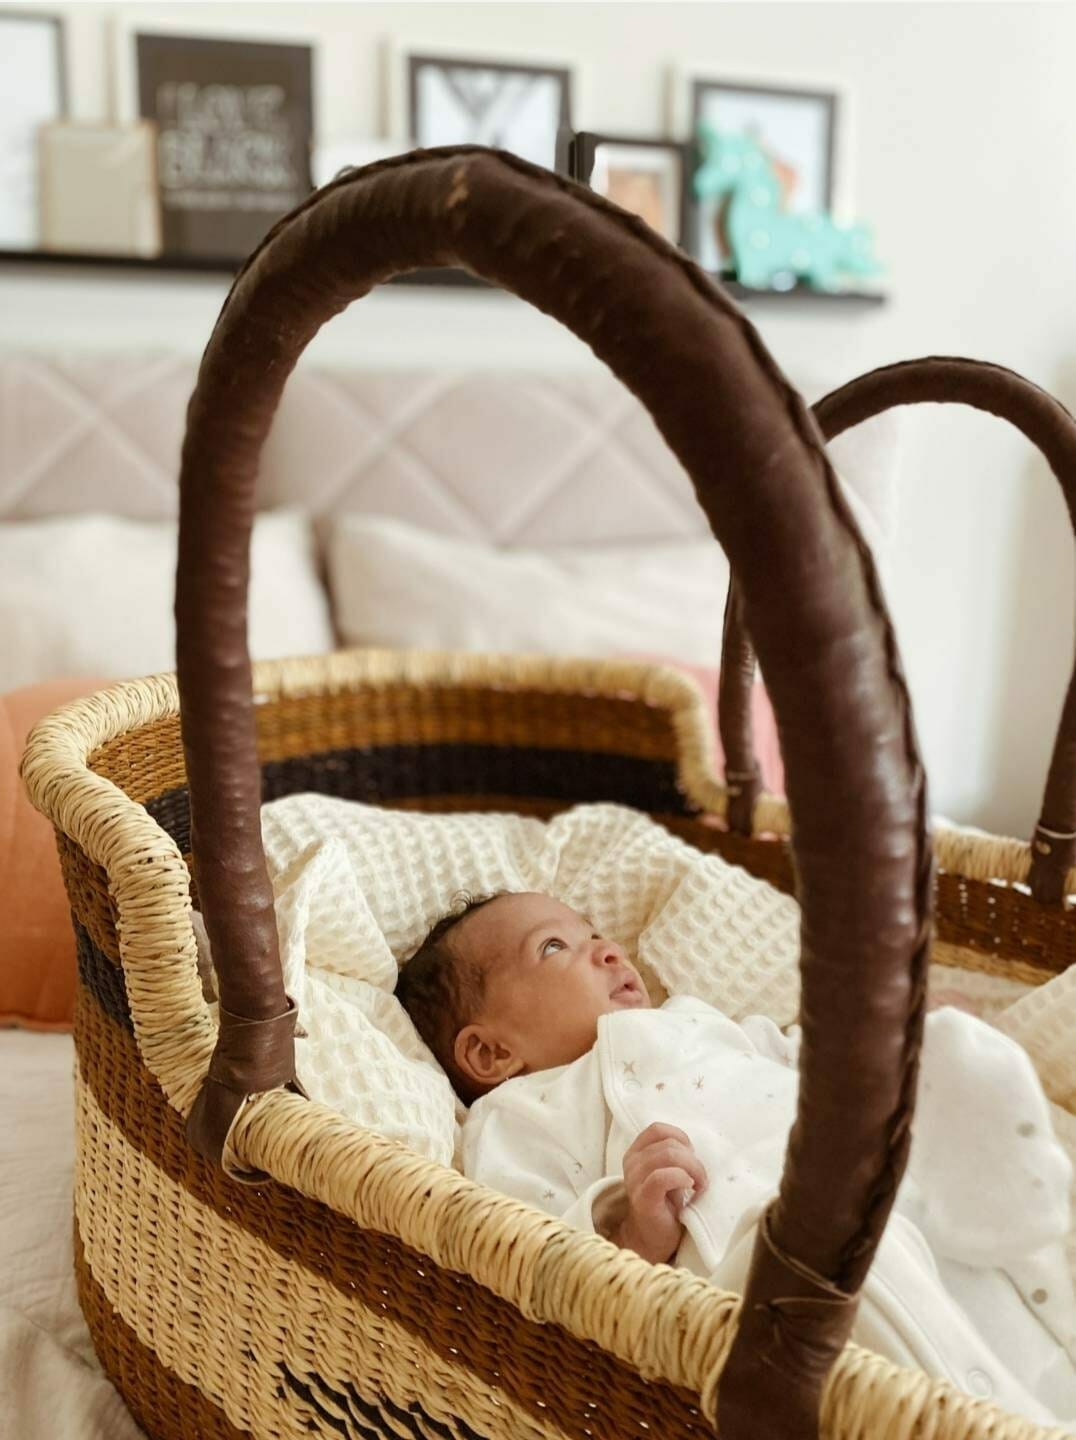 Hand-Woven Moses Basket - Fair Trade Baby Products - Eco Girl Shop